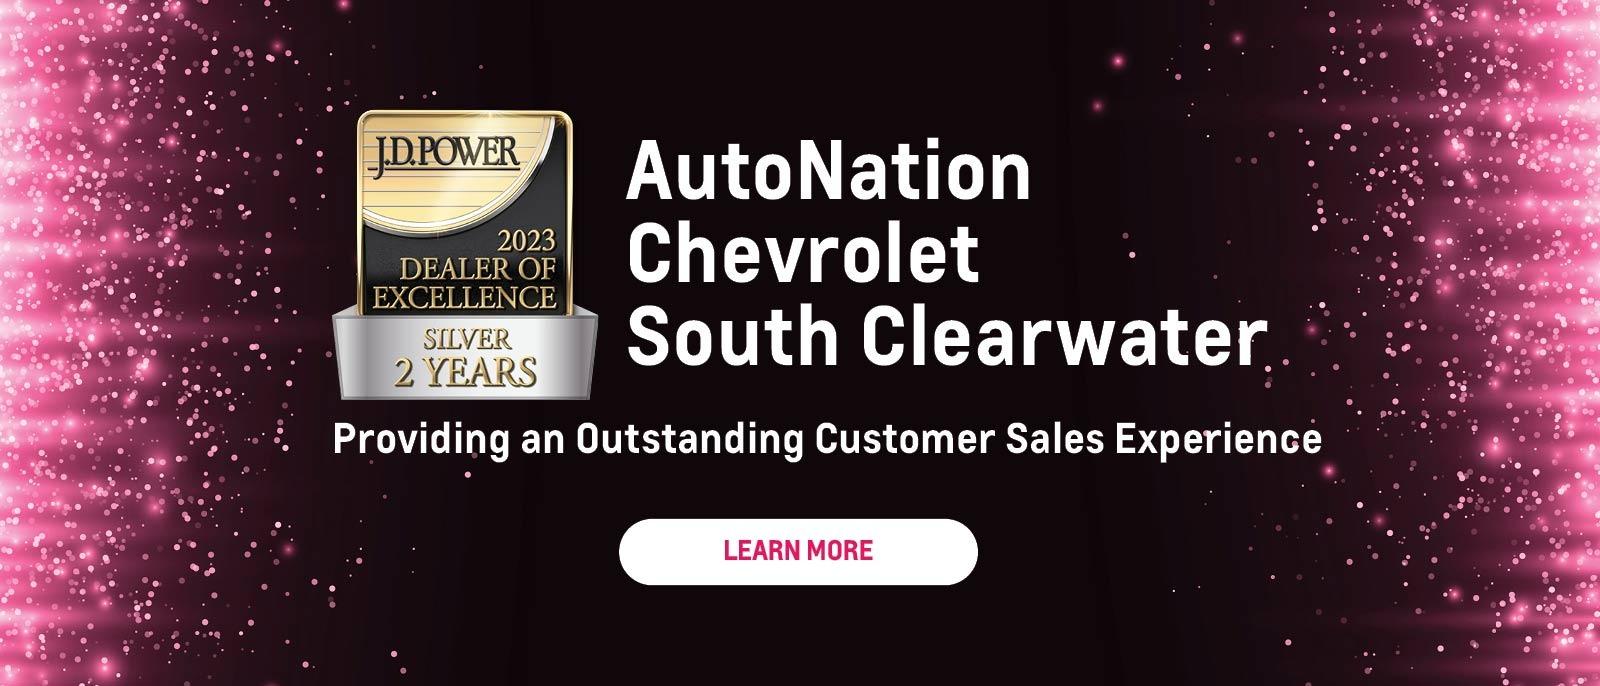 ANUC6918309_2023_JDP_Banners_Chevrolet_South_Clearwater_JPGS8_1600X686